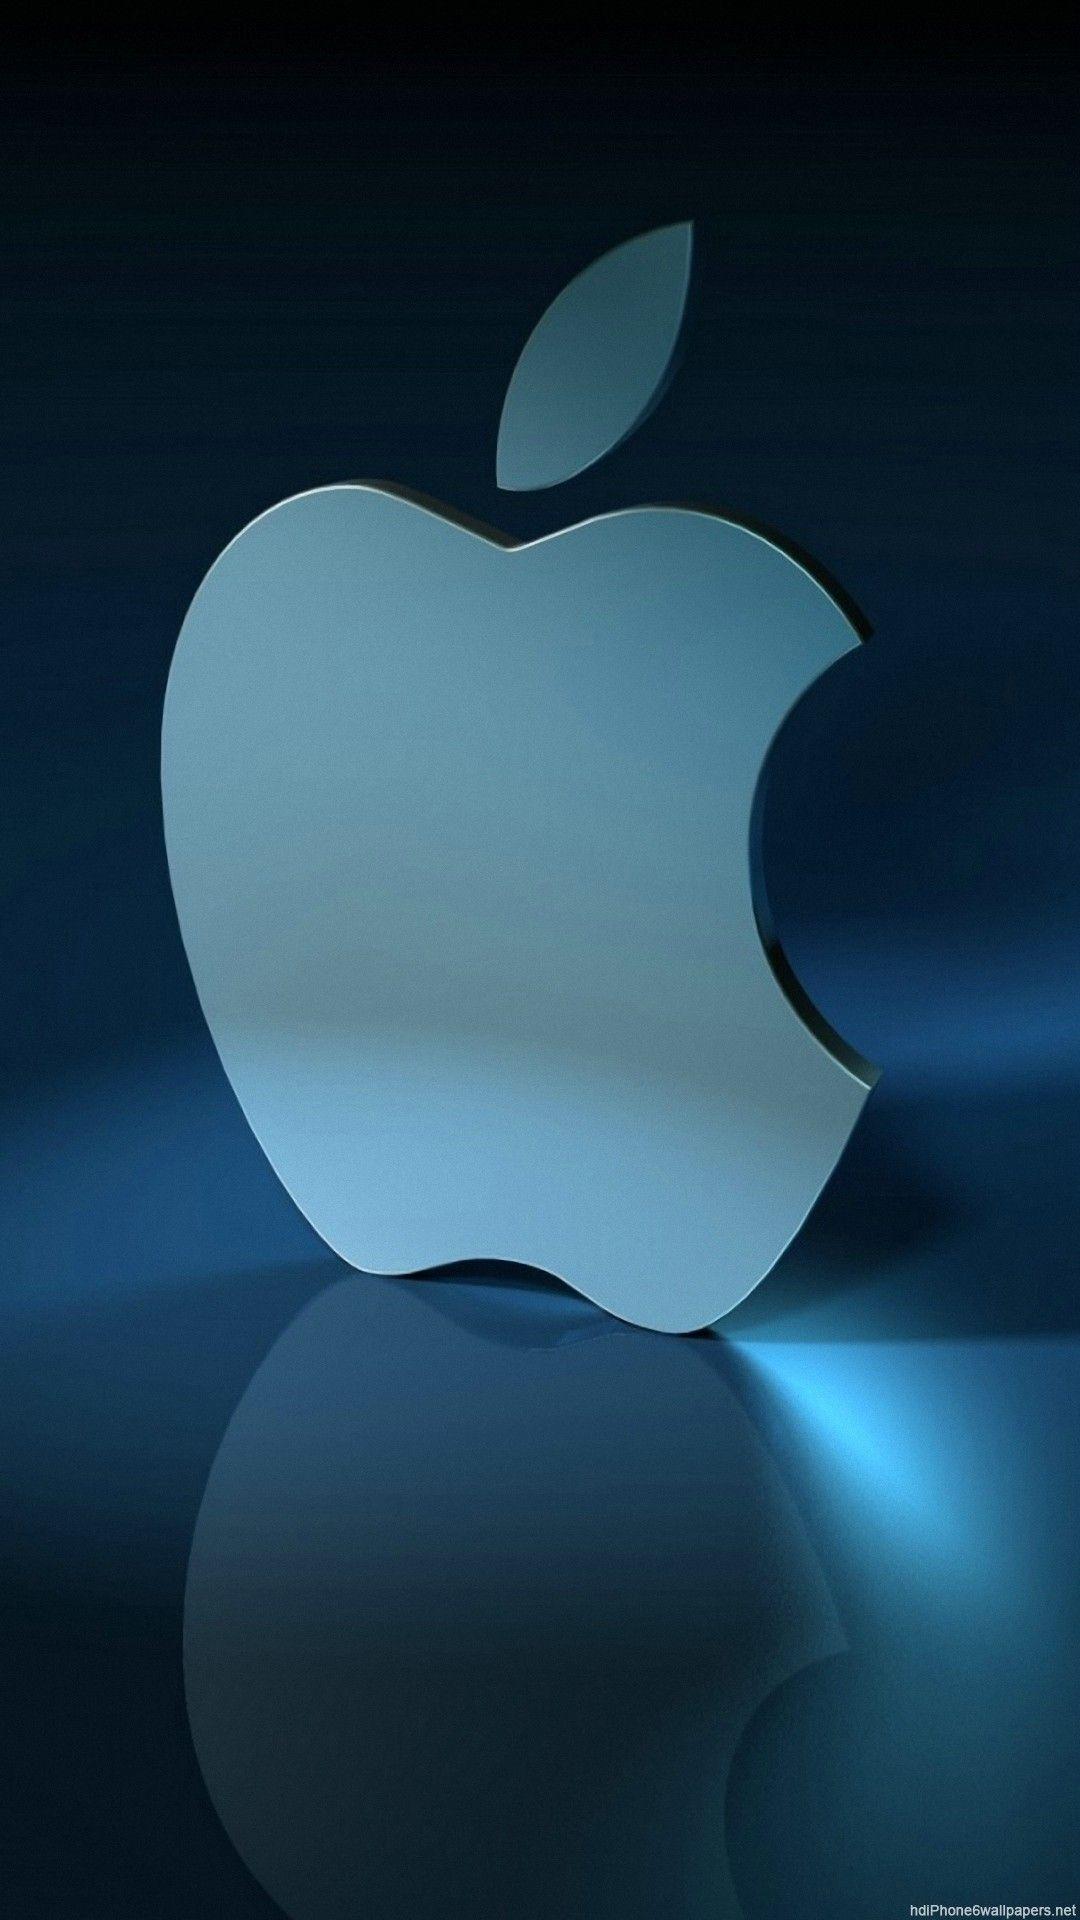 Apple Logo Wallpapers HD 1080p For Iphone - Wallpaper Cave